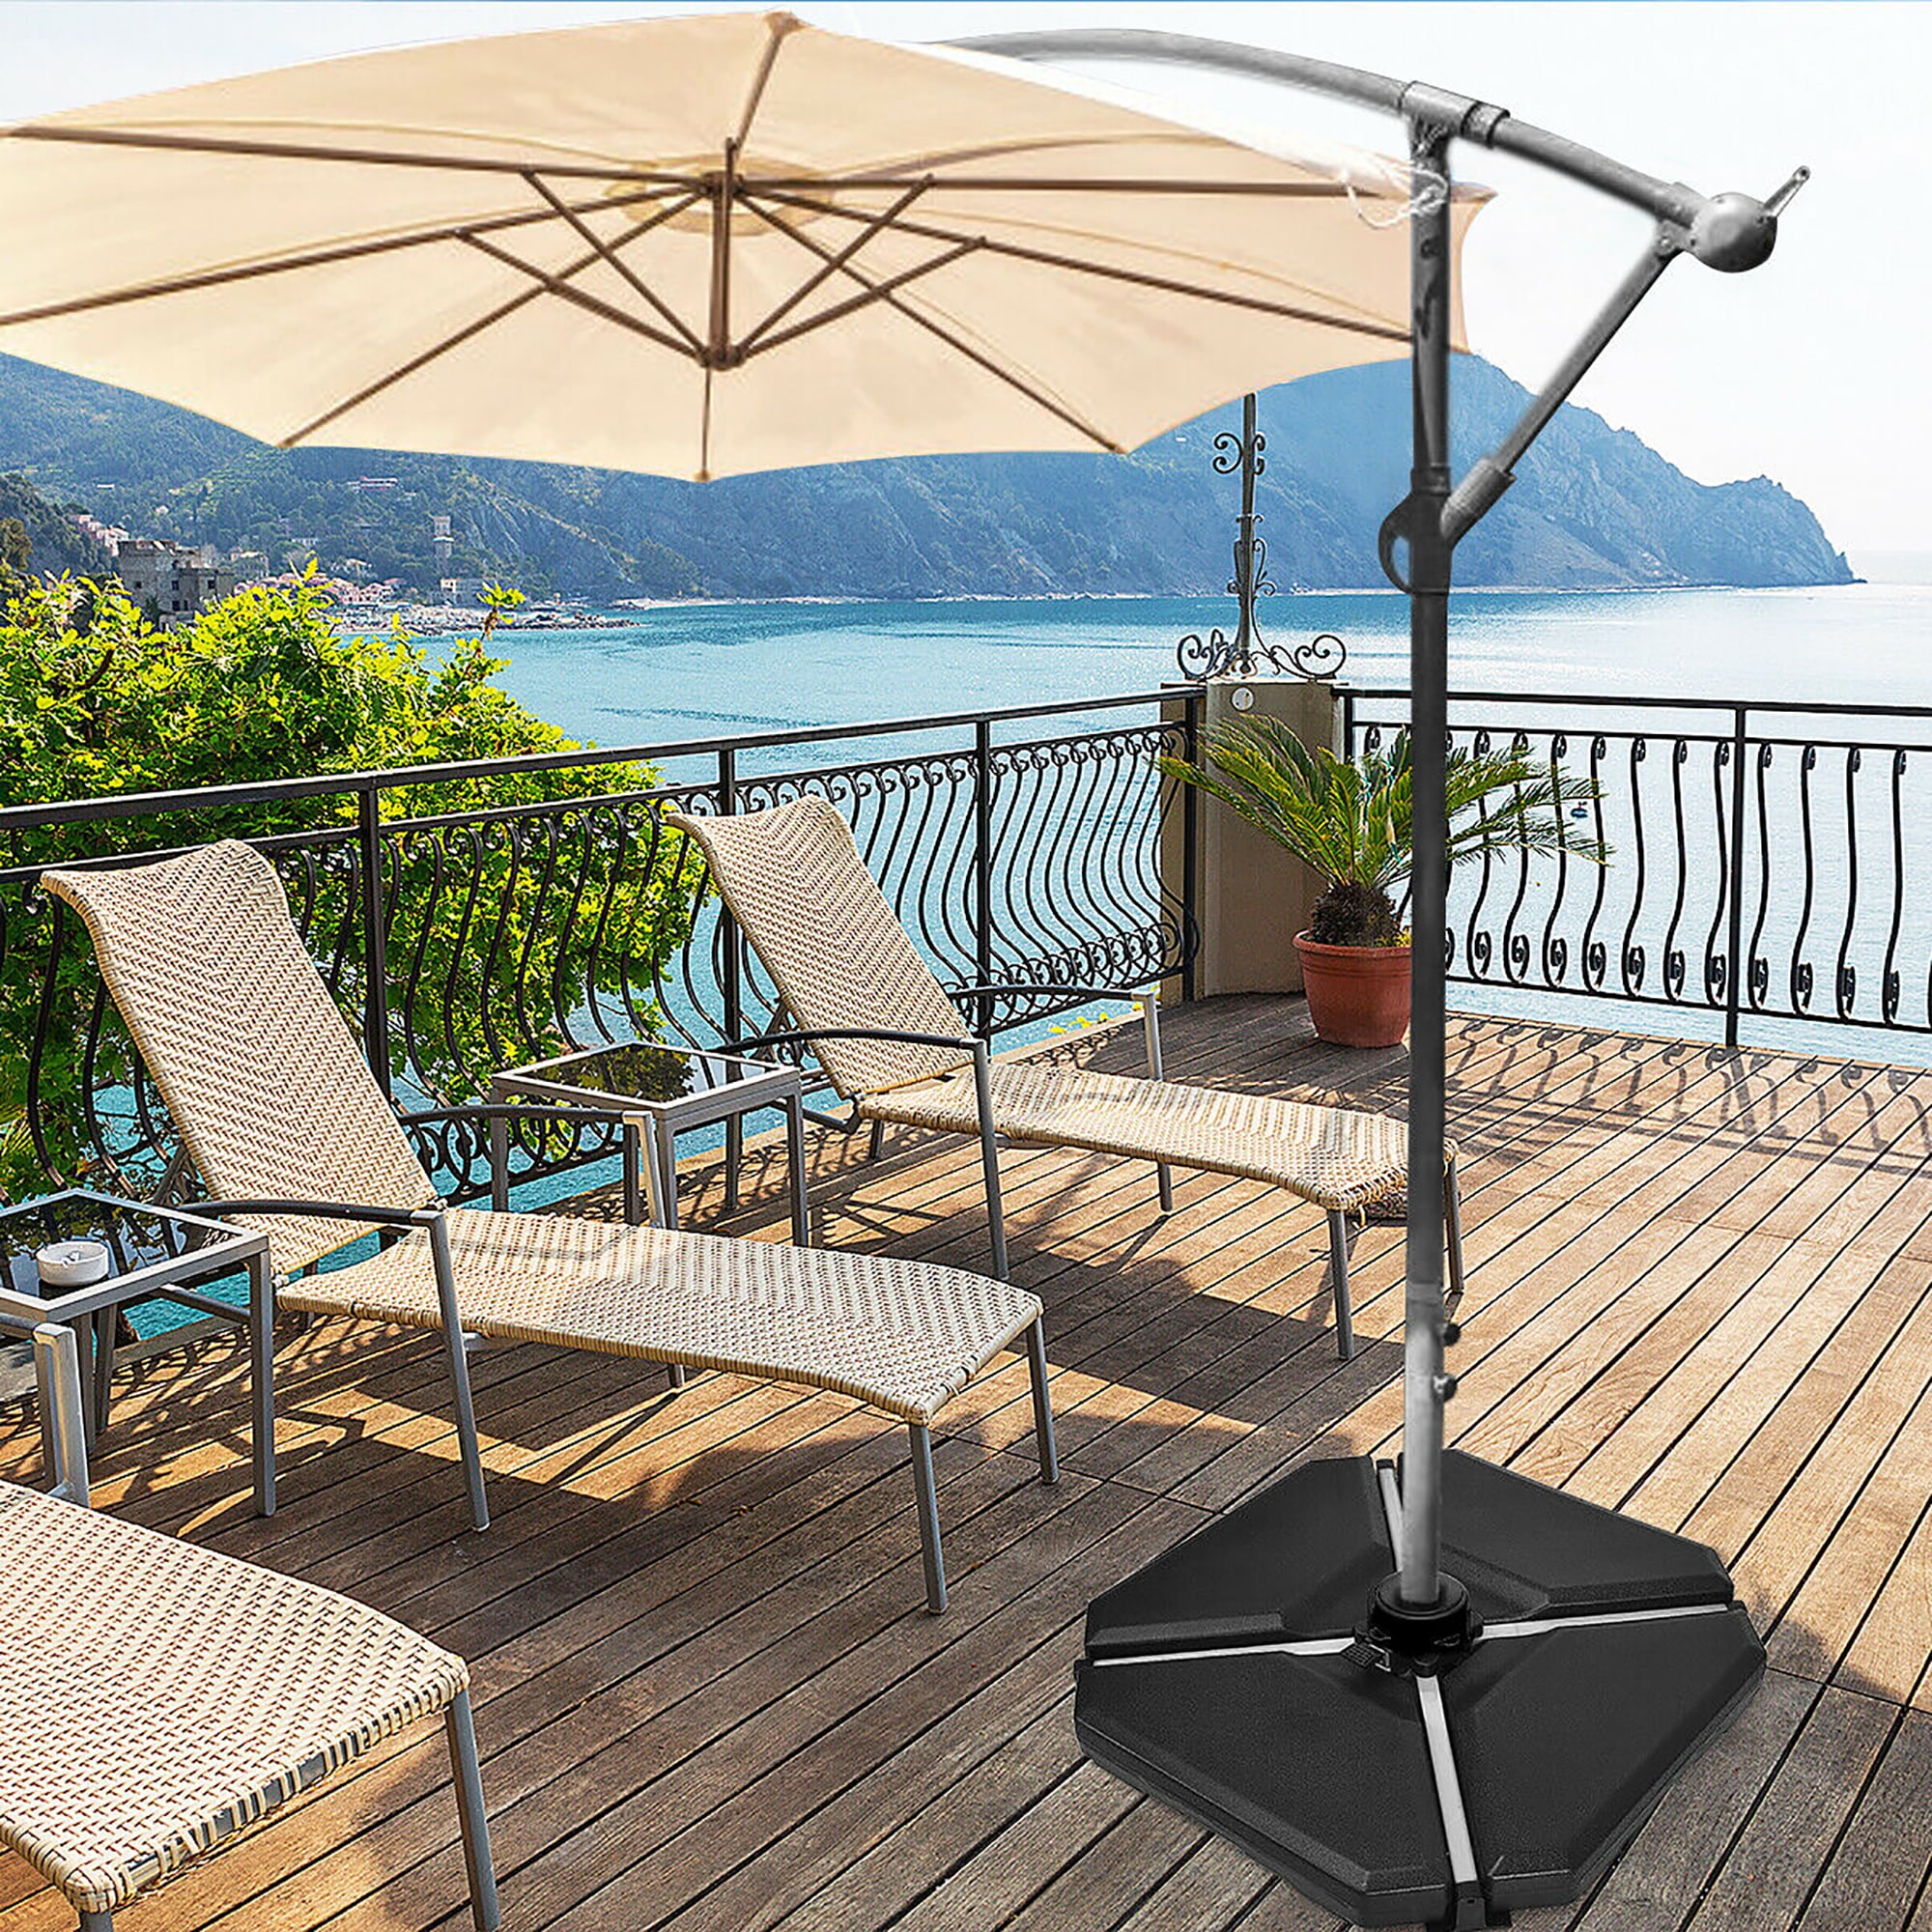 Funnel Concave Handles Tangkula 4PCS Cantilever Offset Patio Umbrella Base Weight Stand 195lbs Triangle Shaped Sand Water Filled Weight Outdoor Umbrella Base Plate w/Easy-Fill Spouts 